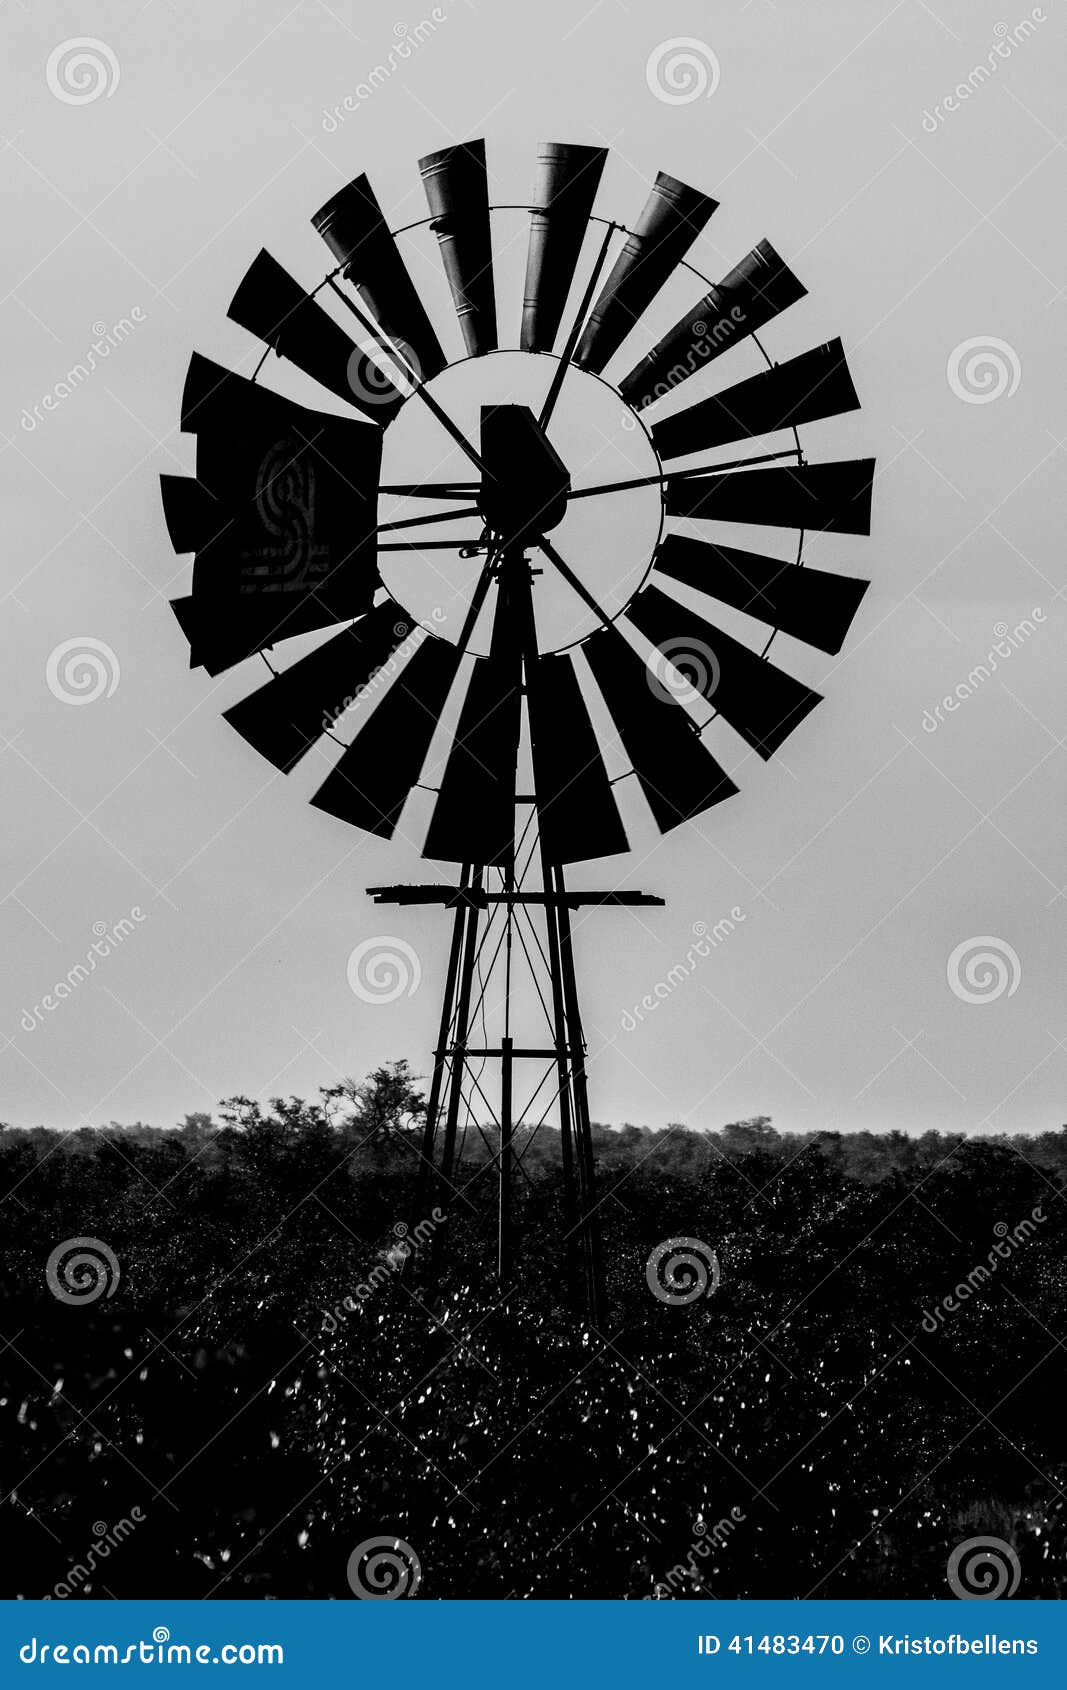 Silhouette of an old-style farm windmill standing in the bush.